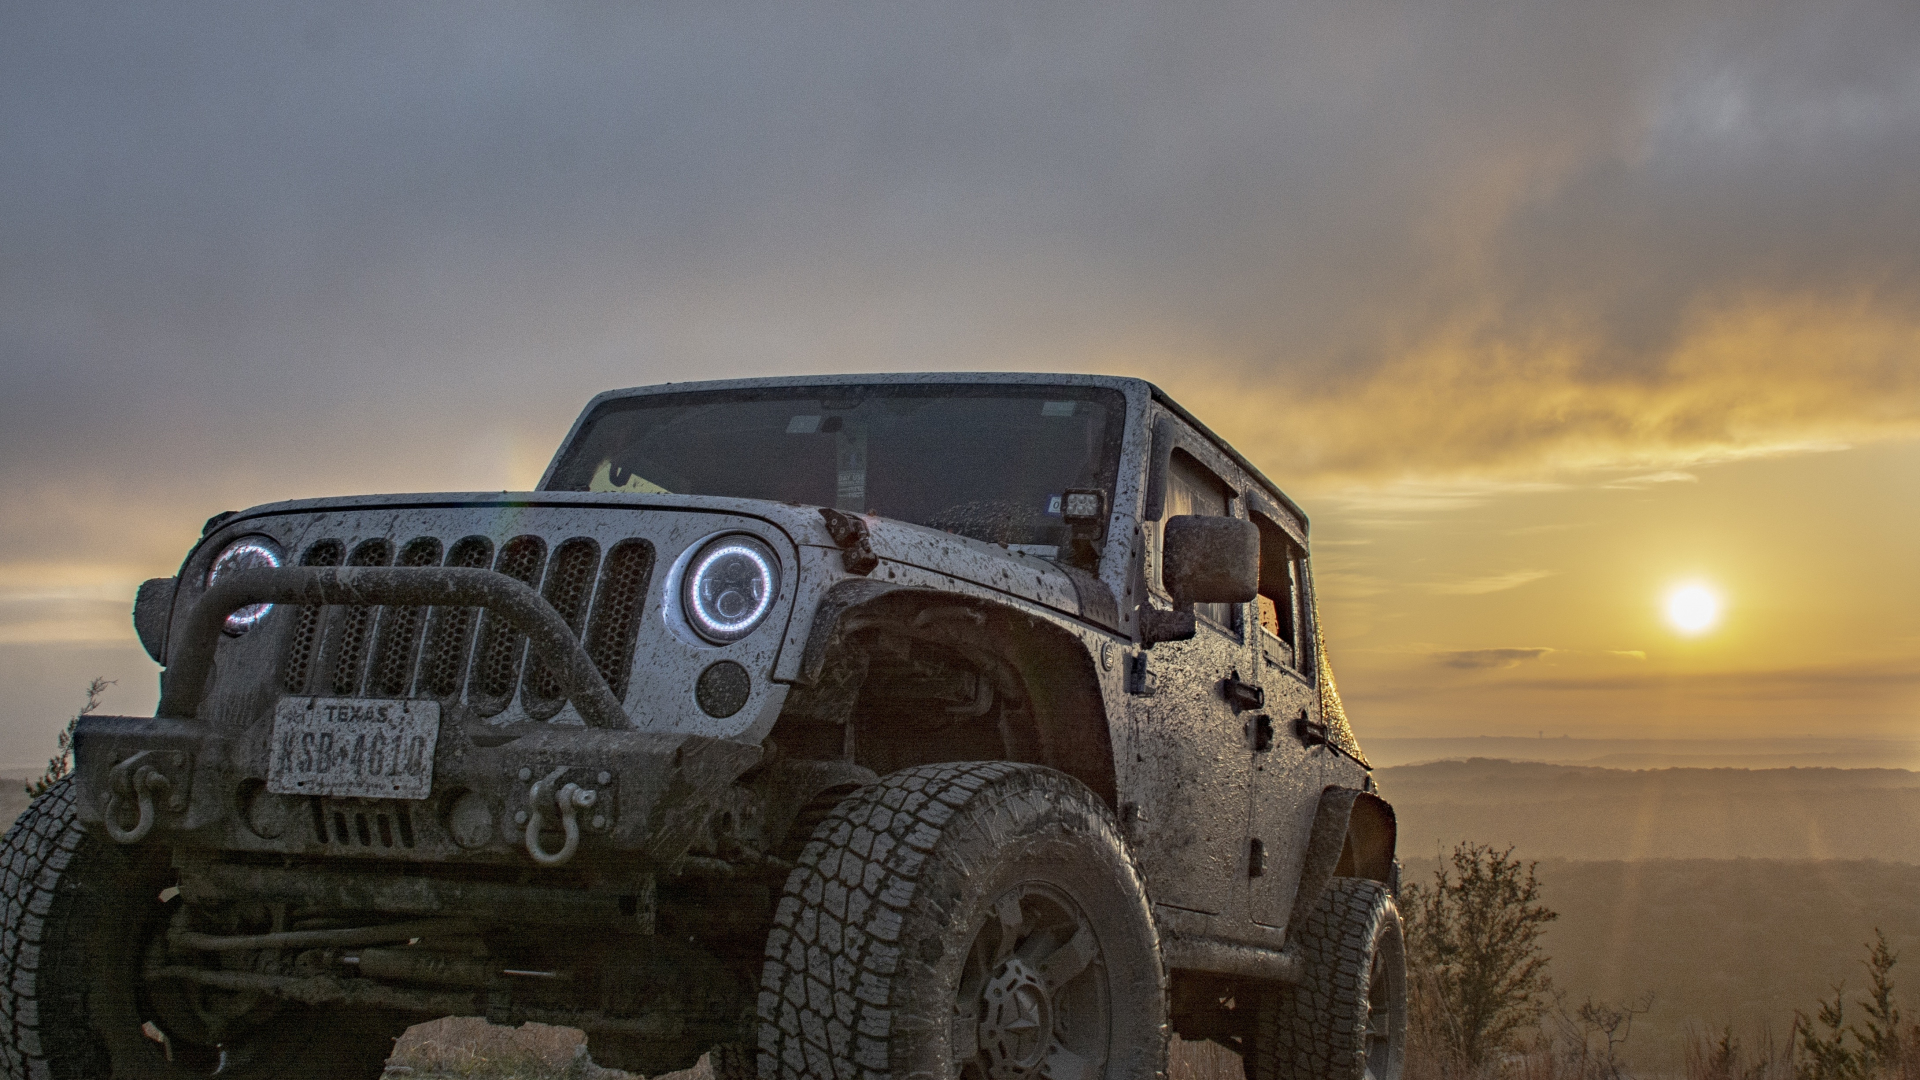 Jeep Hd Wallpapers 1080p | All Wallapers